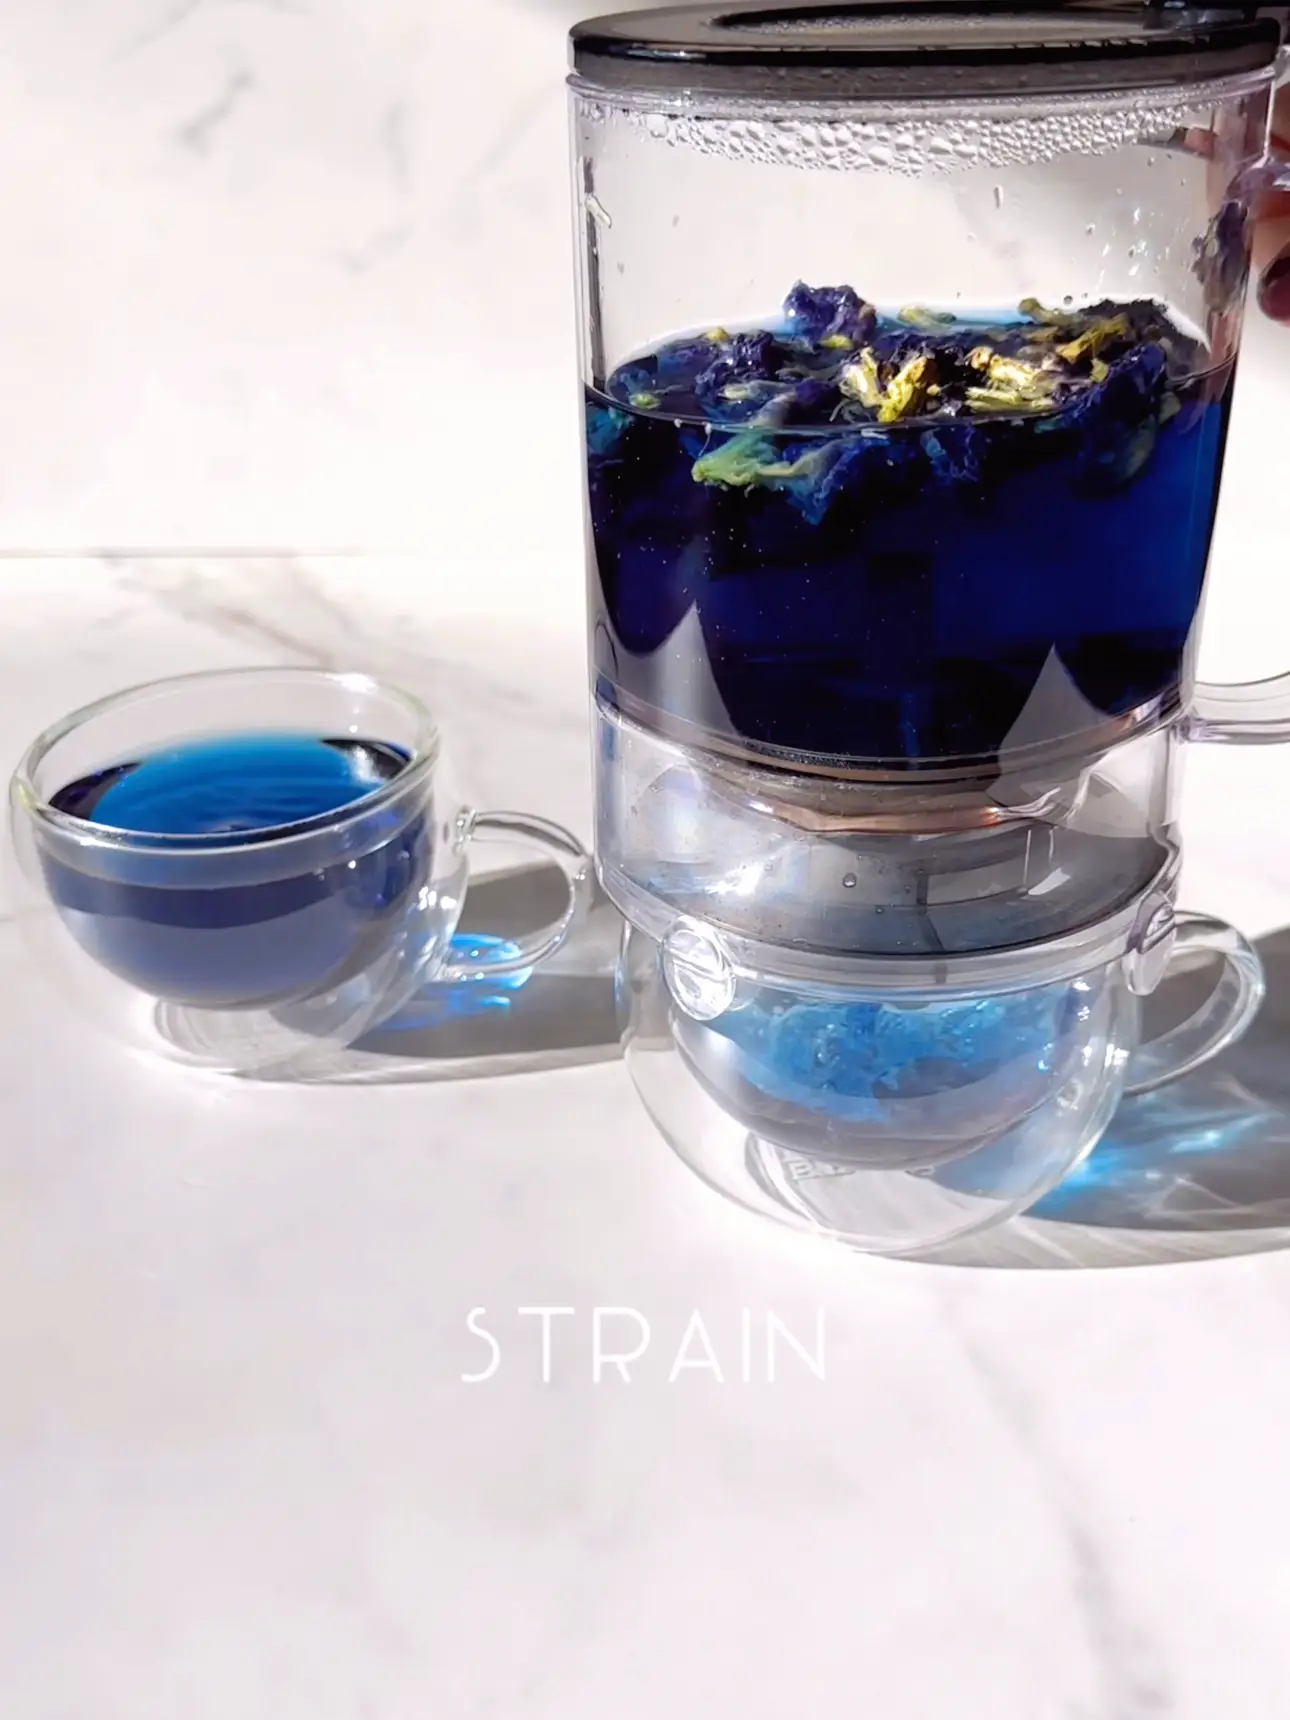 Butterfly Pea Flower Tea - Foodie's Fun - This That More